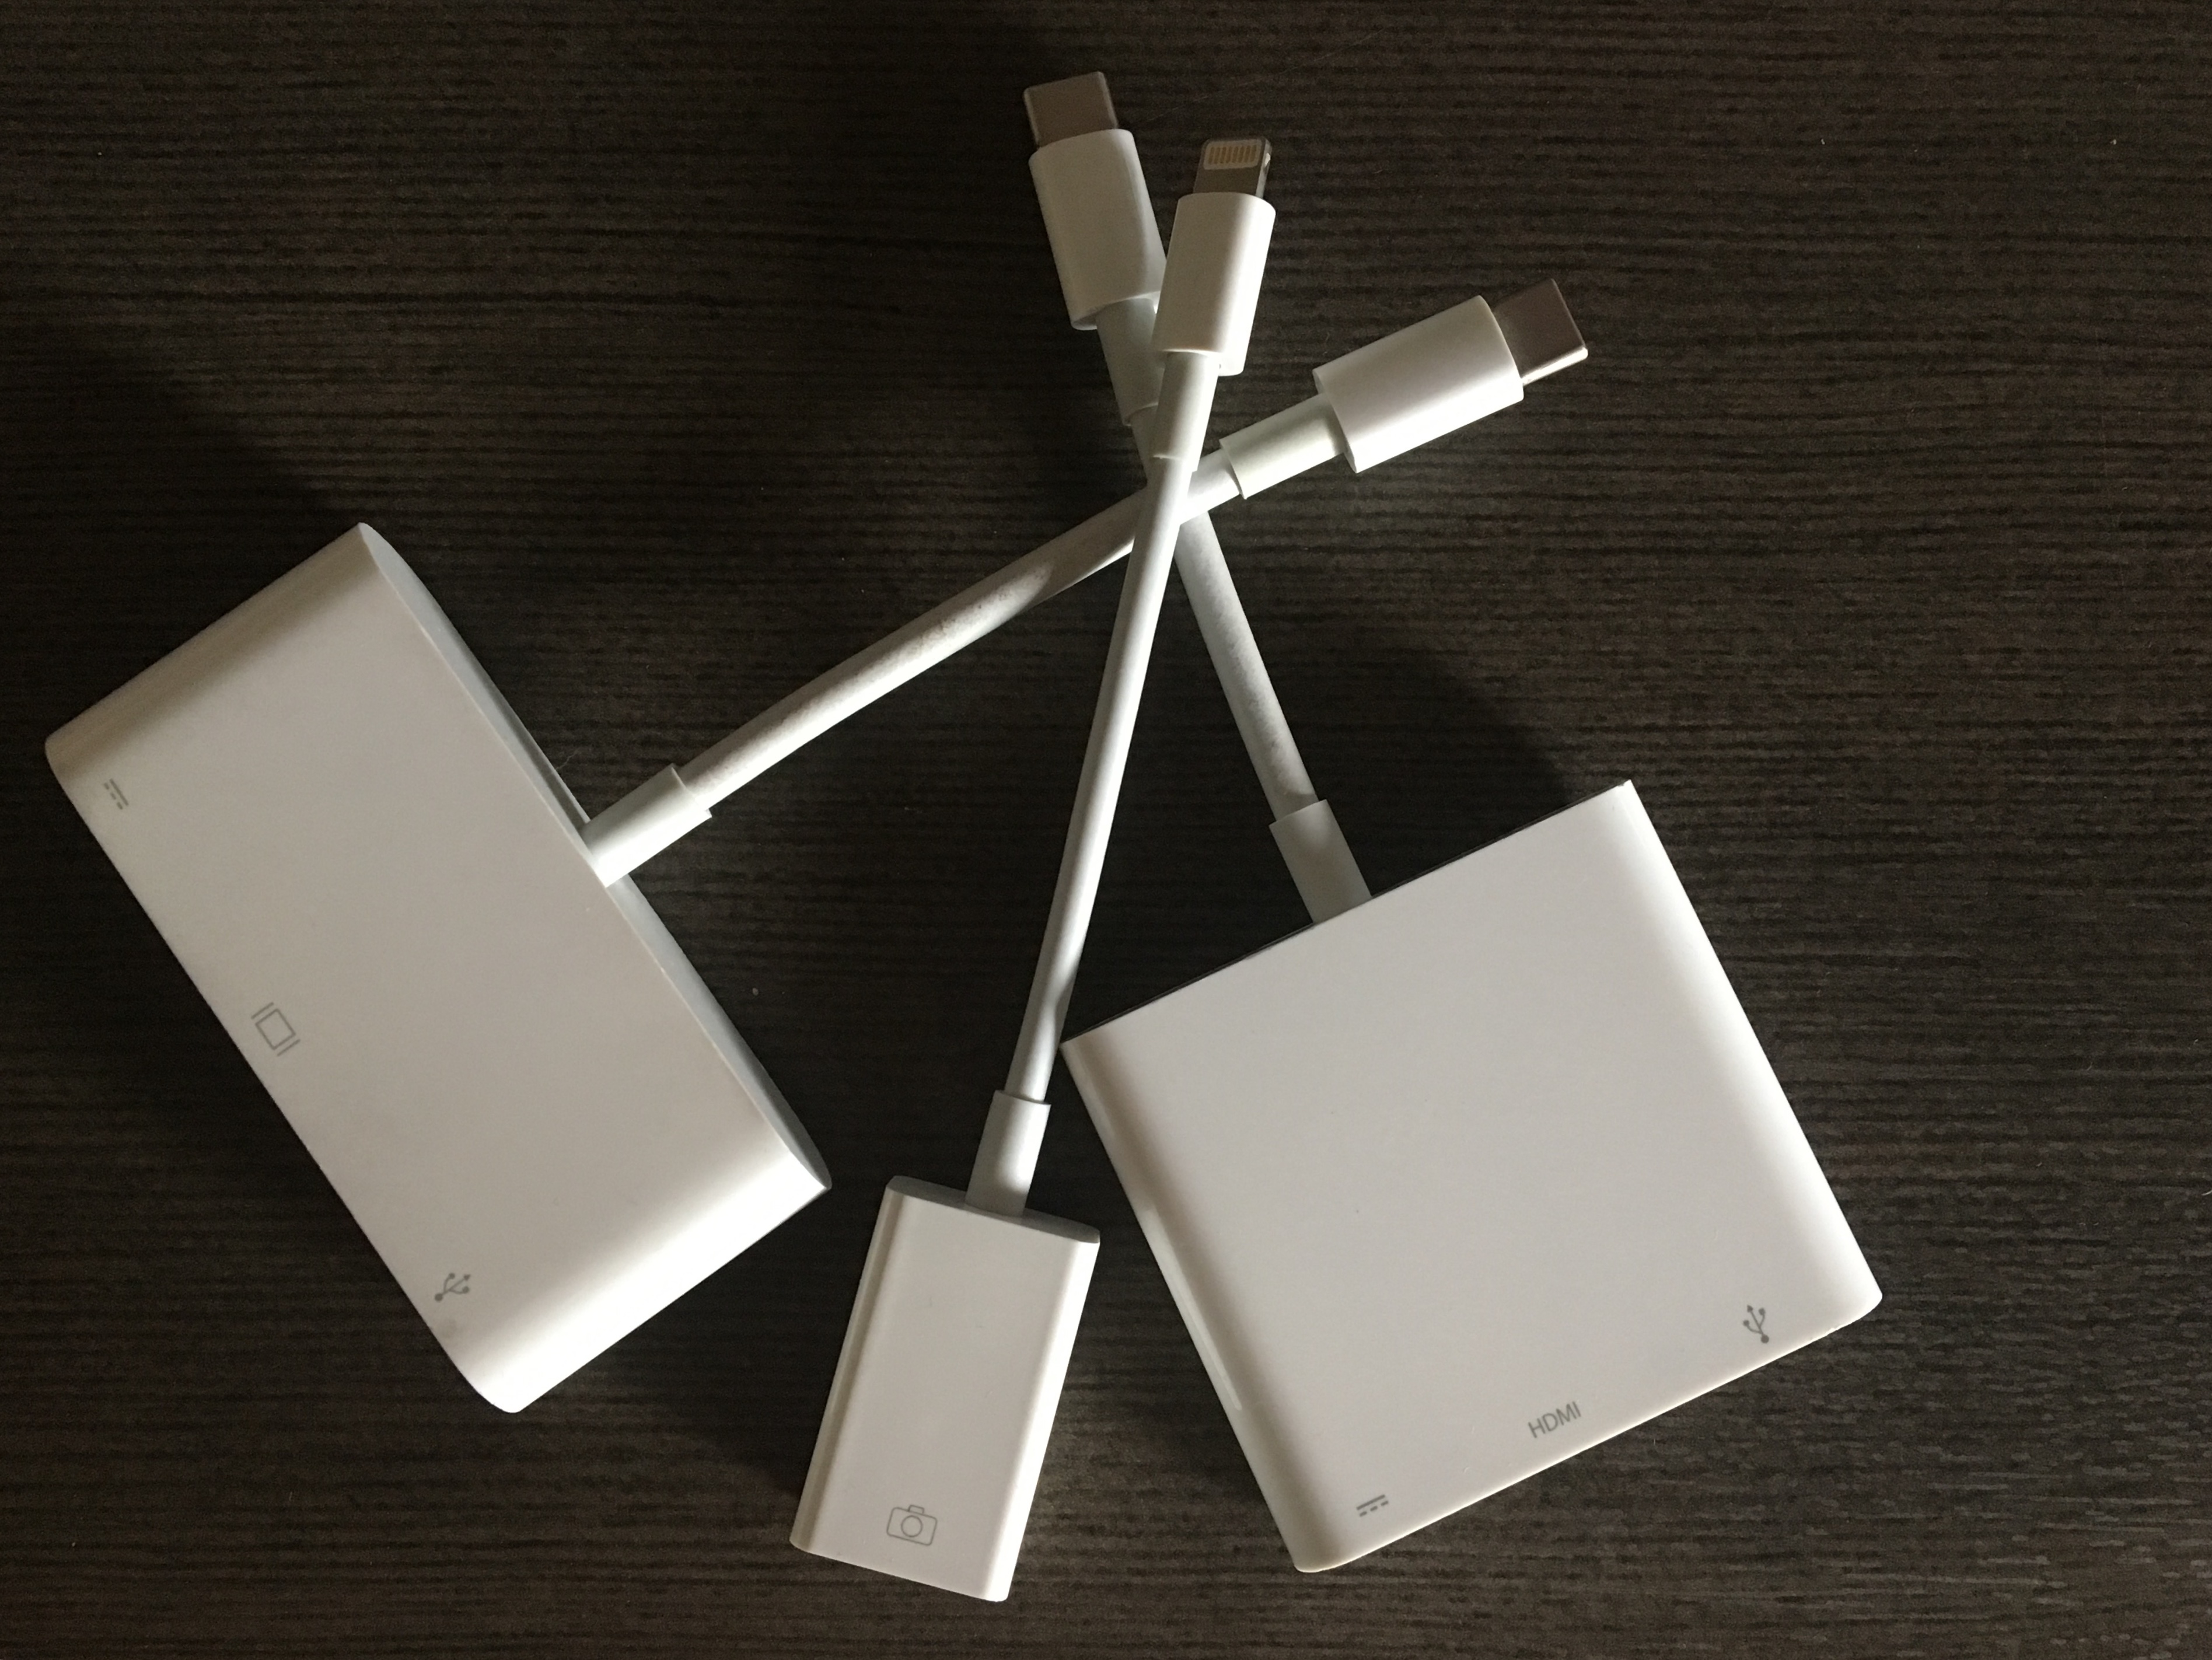 a cluster of 3 white adaptors for Apple computer cables